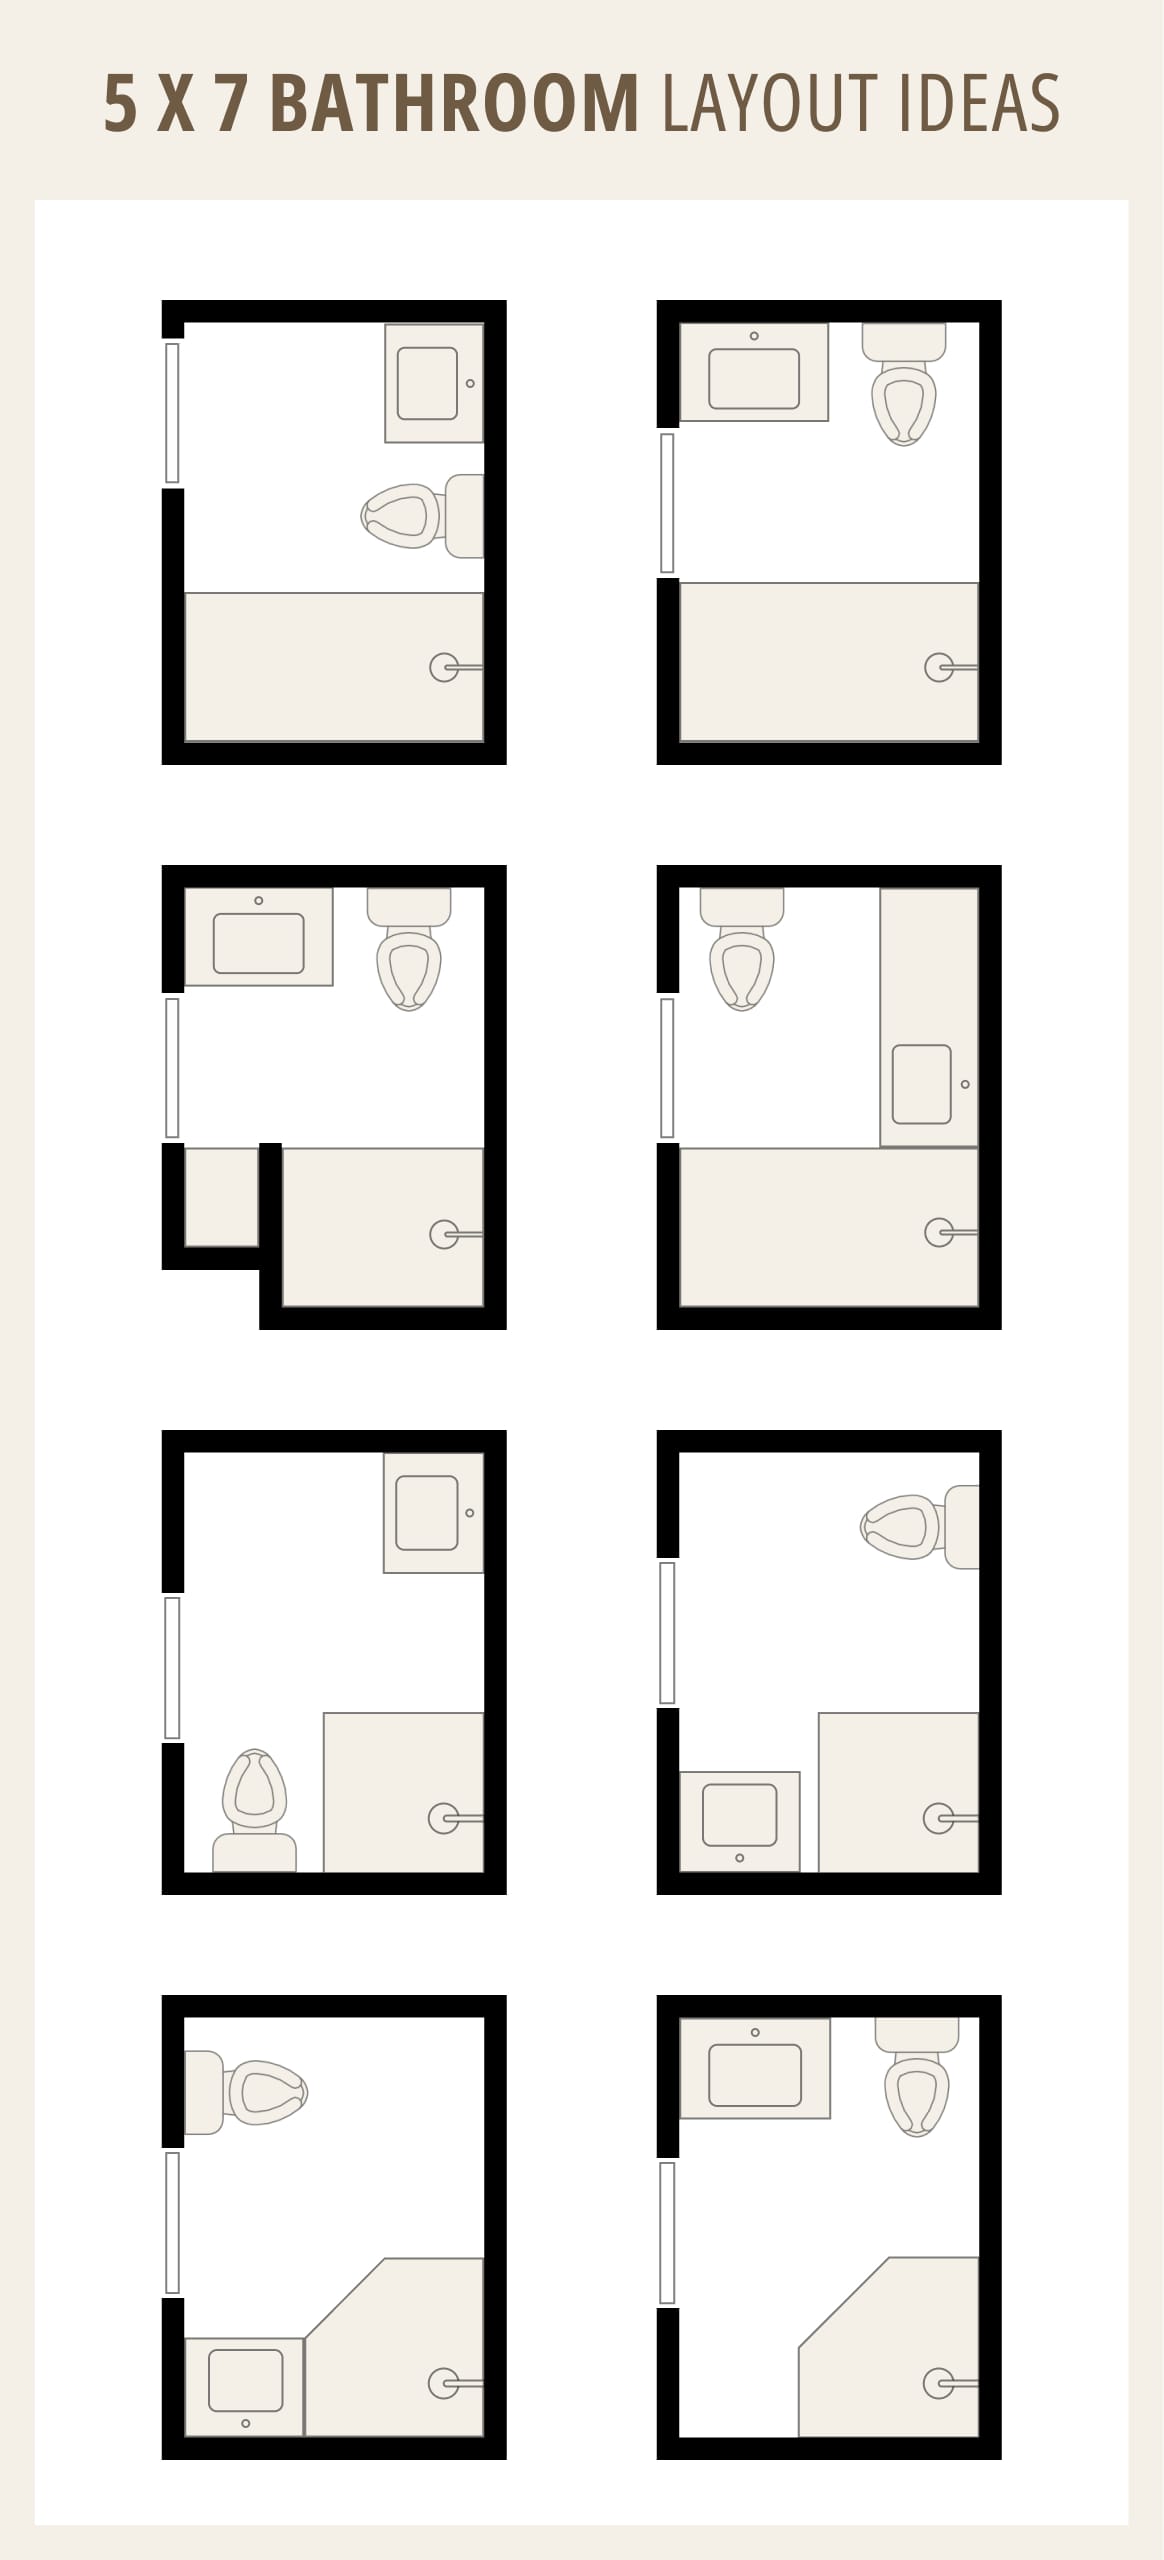 5x7 bathroom with shower layout ideas, small full bathroom space planning ideas and floor plan
